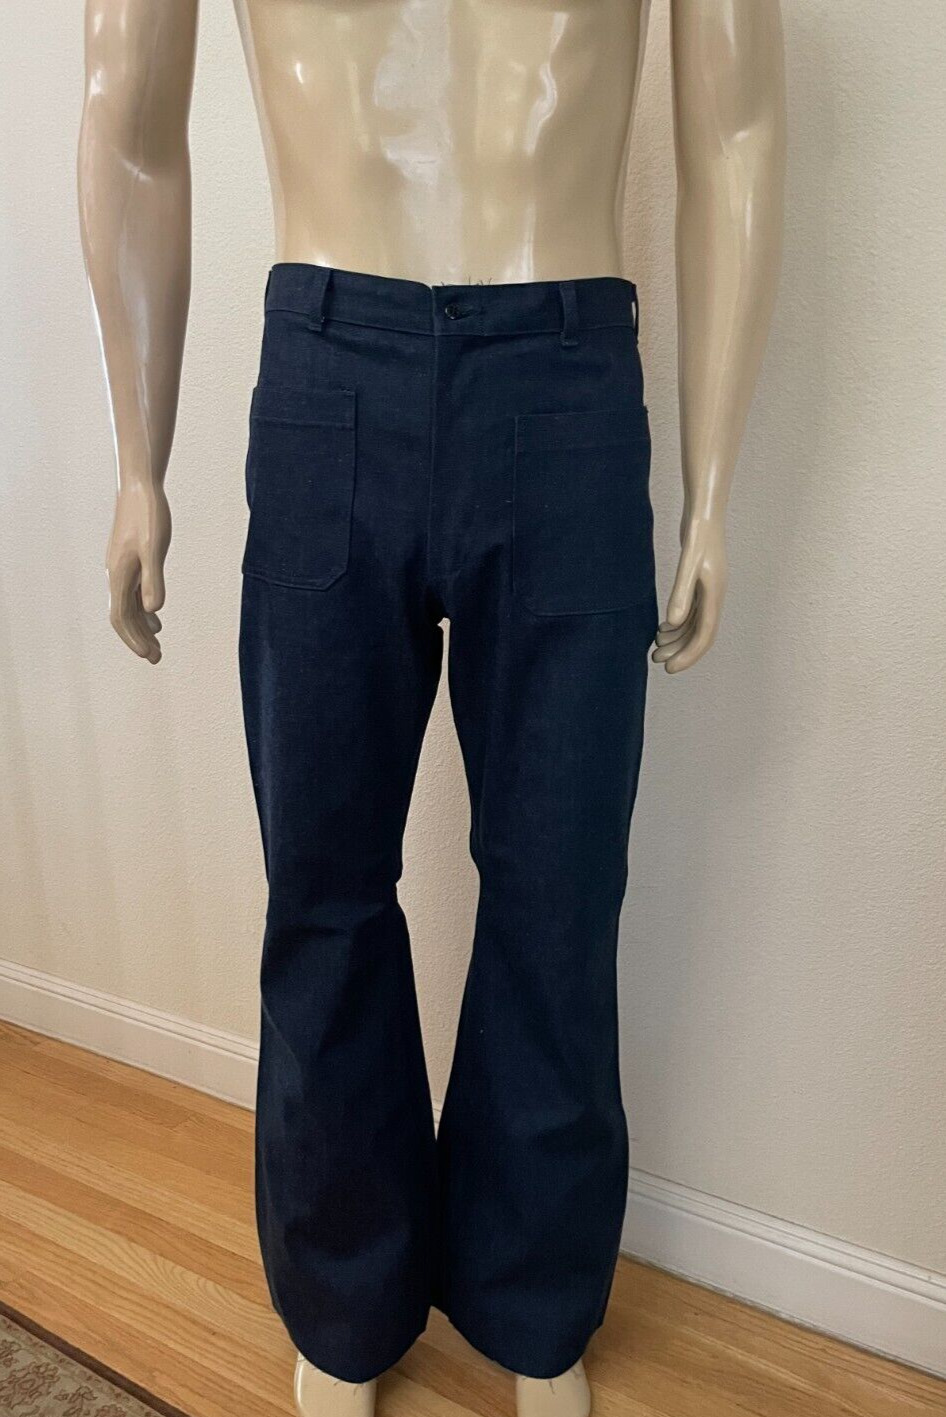 UNISSUED US NAVY DENIM UTILITY TROUSERS FLARED BELLBOTTOM DUNGAREES 30 XL  (NWT)